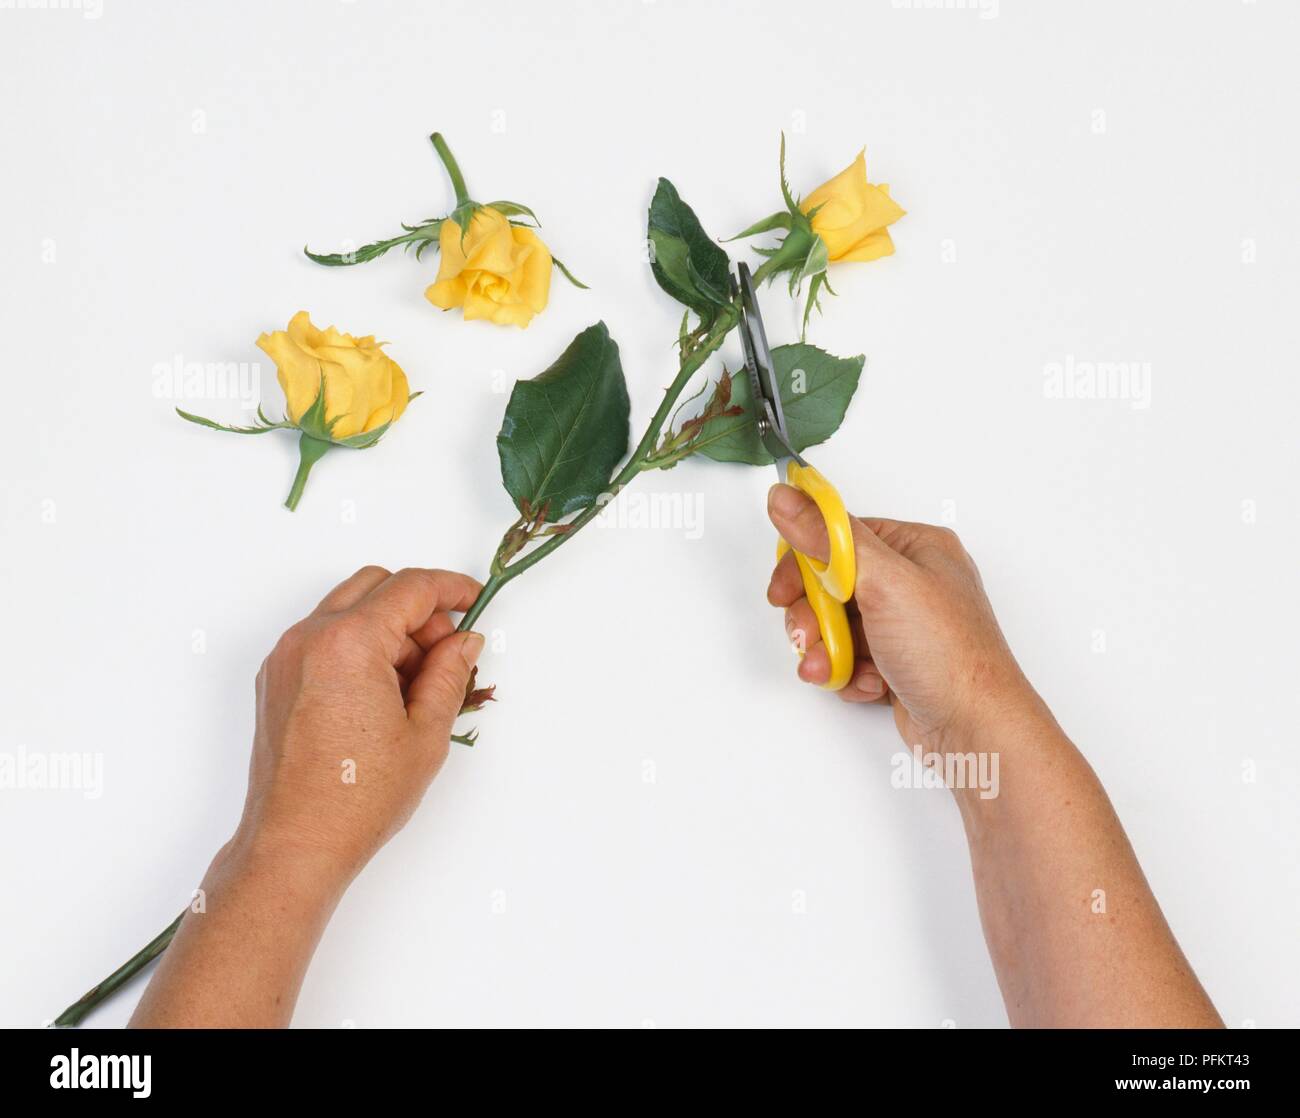 Hands cutting off yellow rose flower head of stem using scissors, two cut flower heads nearby, close-up Stock Photo